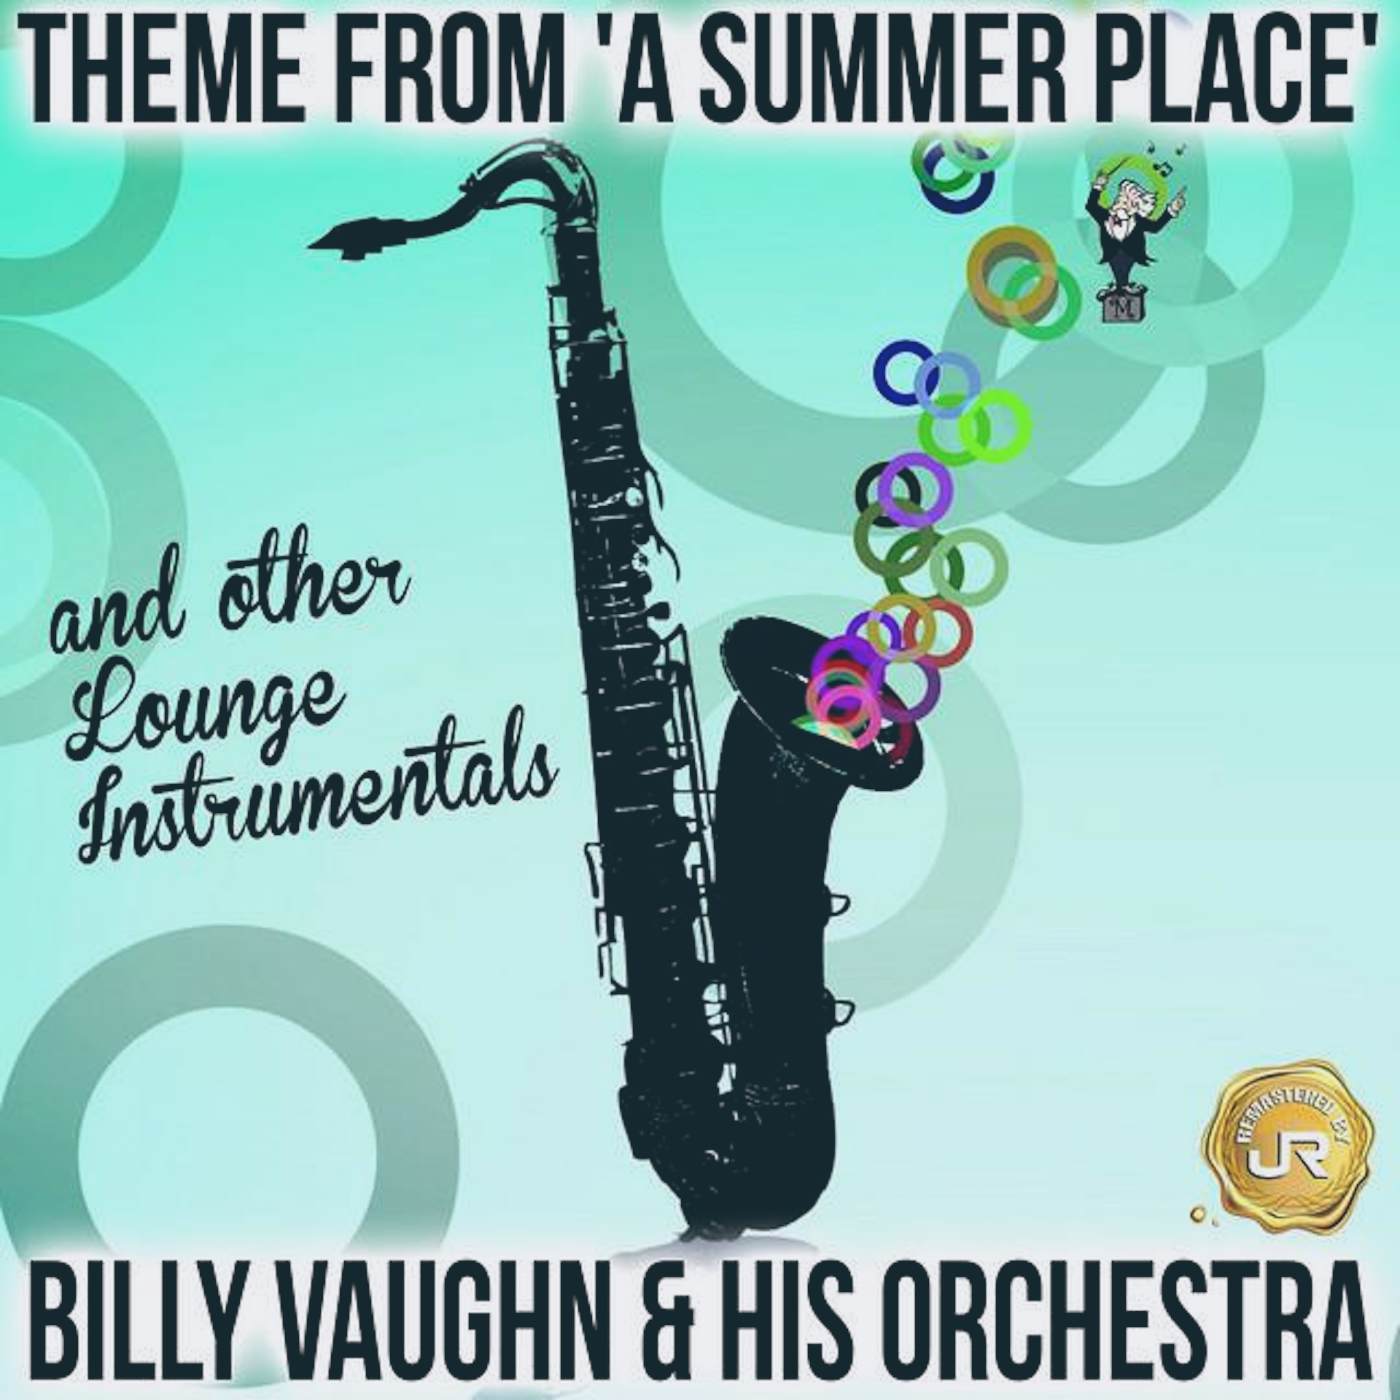 Billy Vaughn & his Orchestra